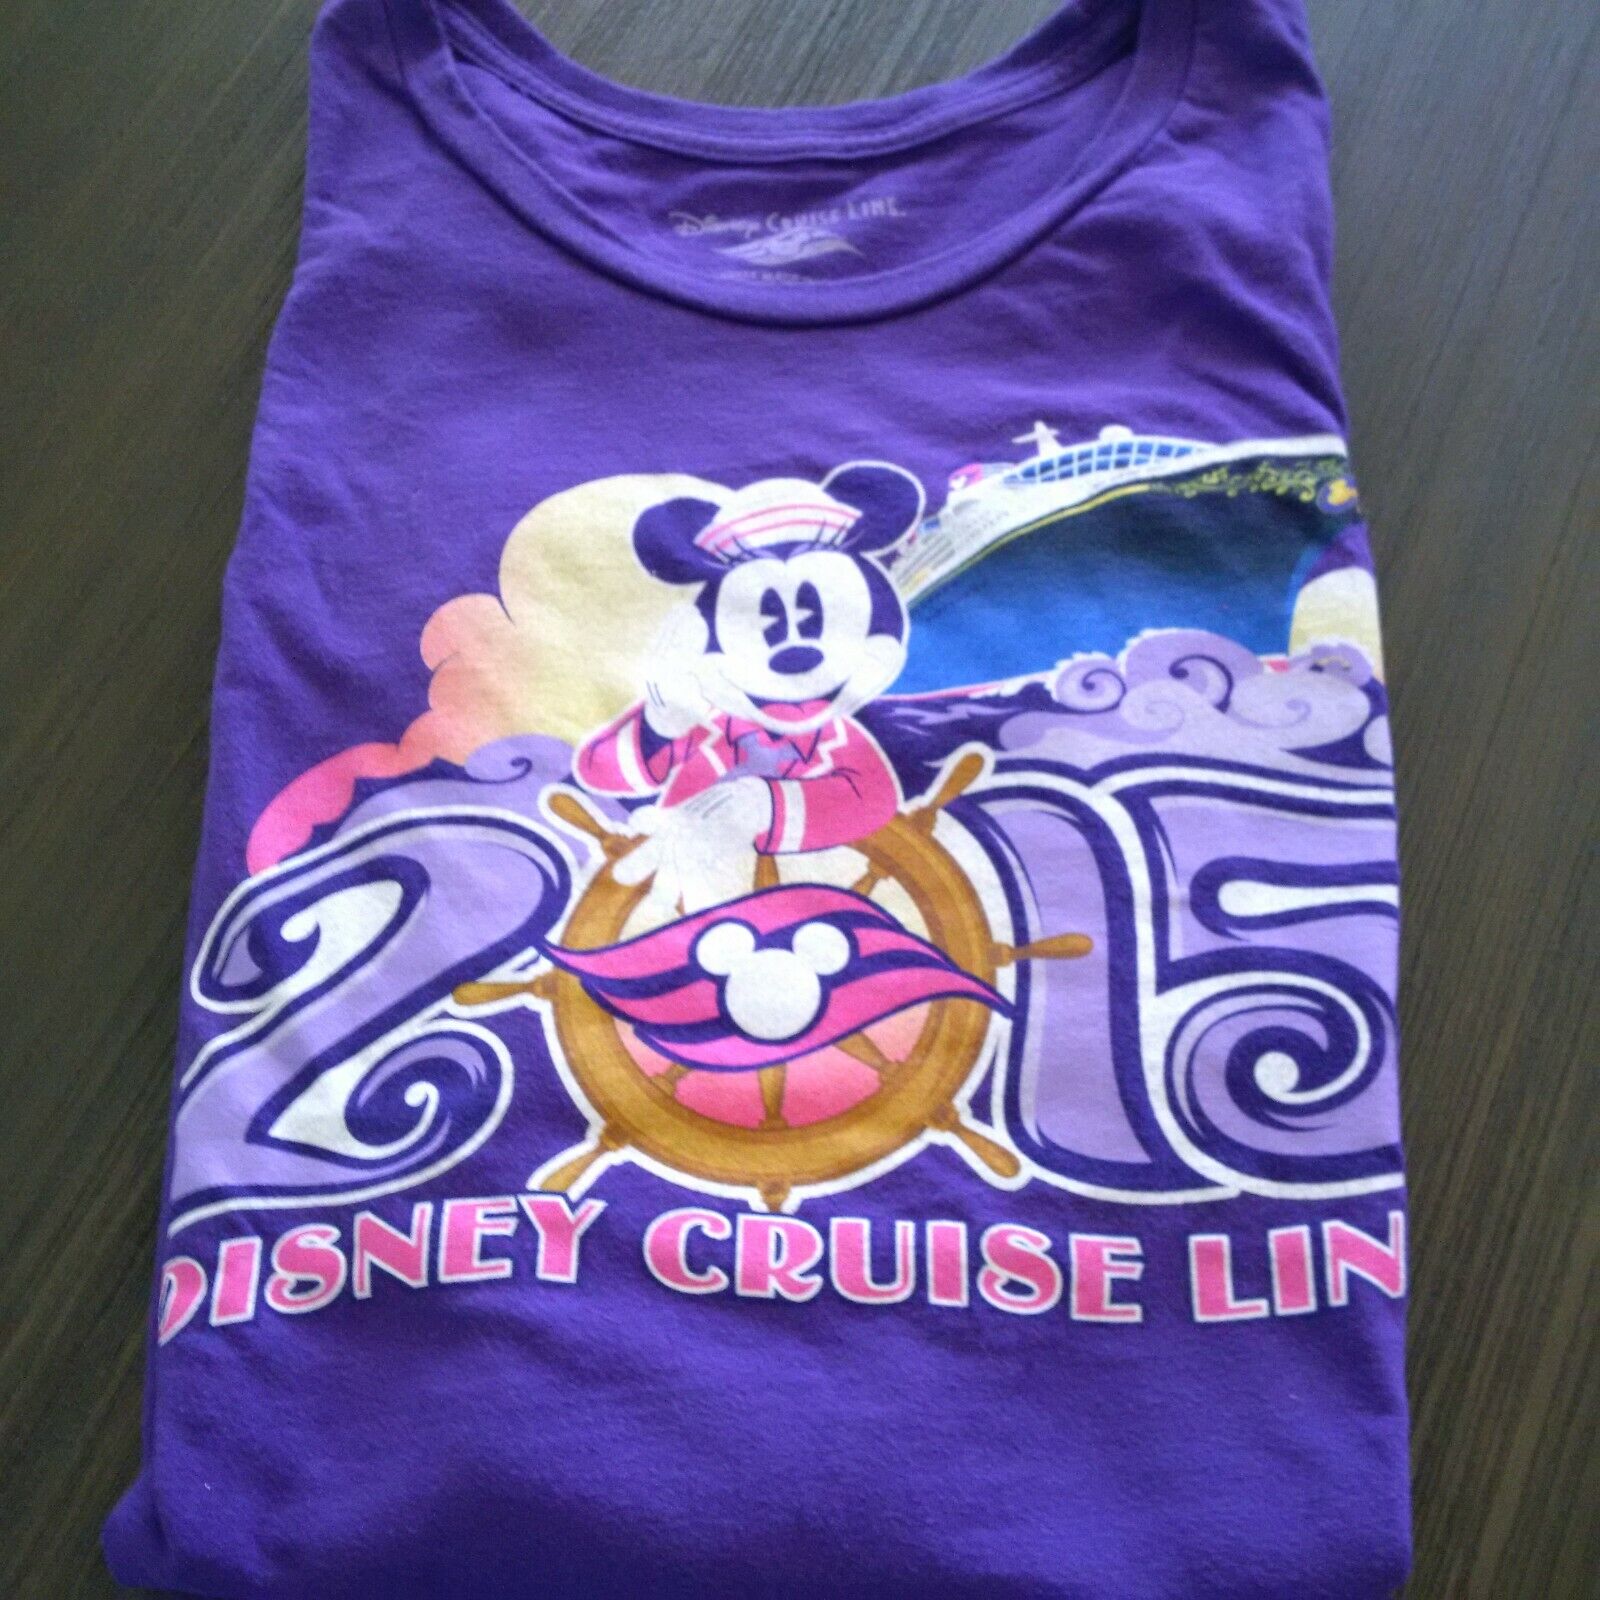 Disney Cruise Line Tee 2015 purple with Minnie sz L s/s VG collectible